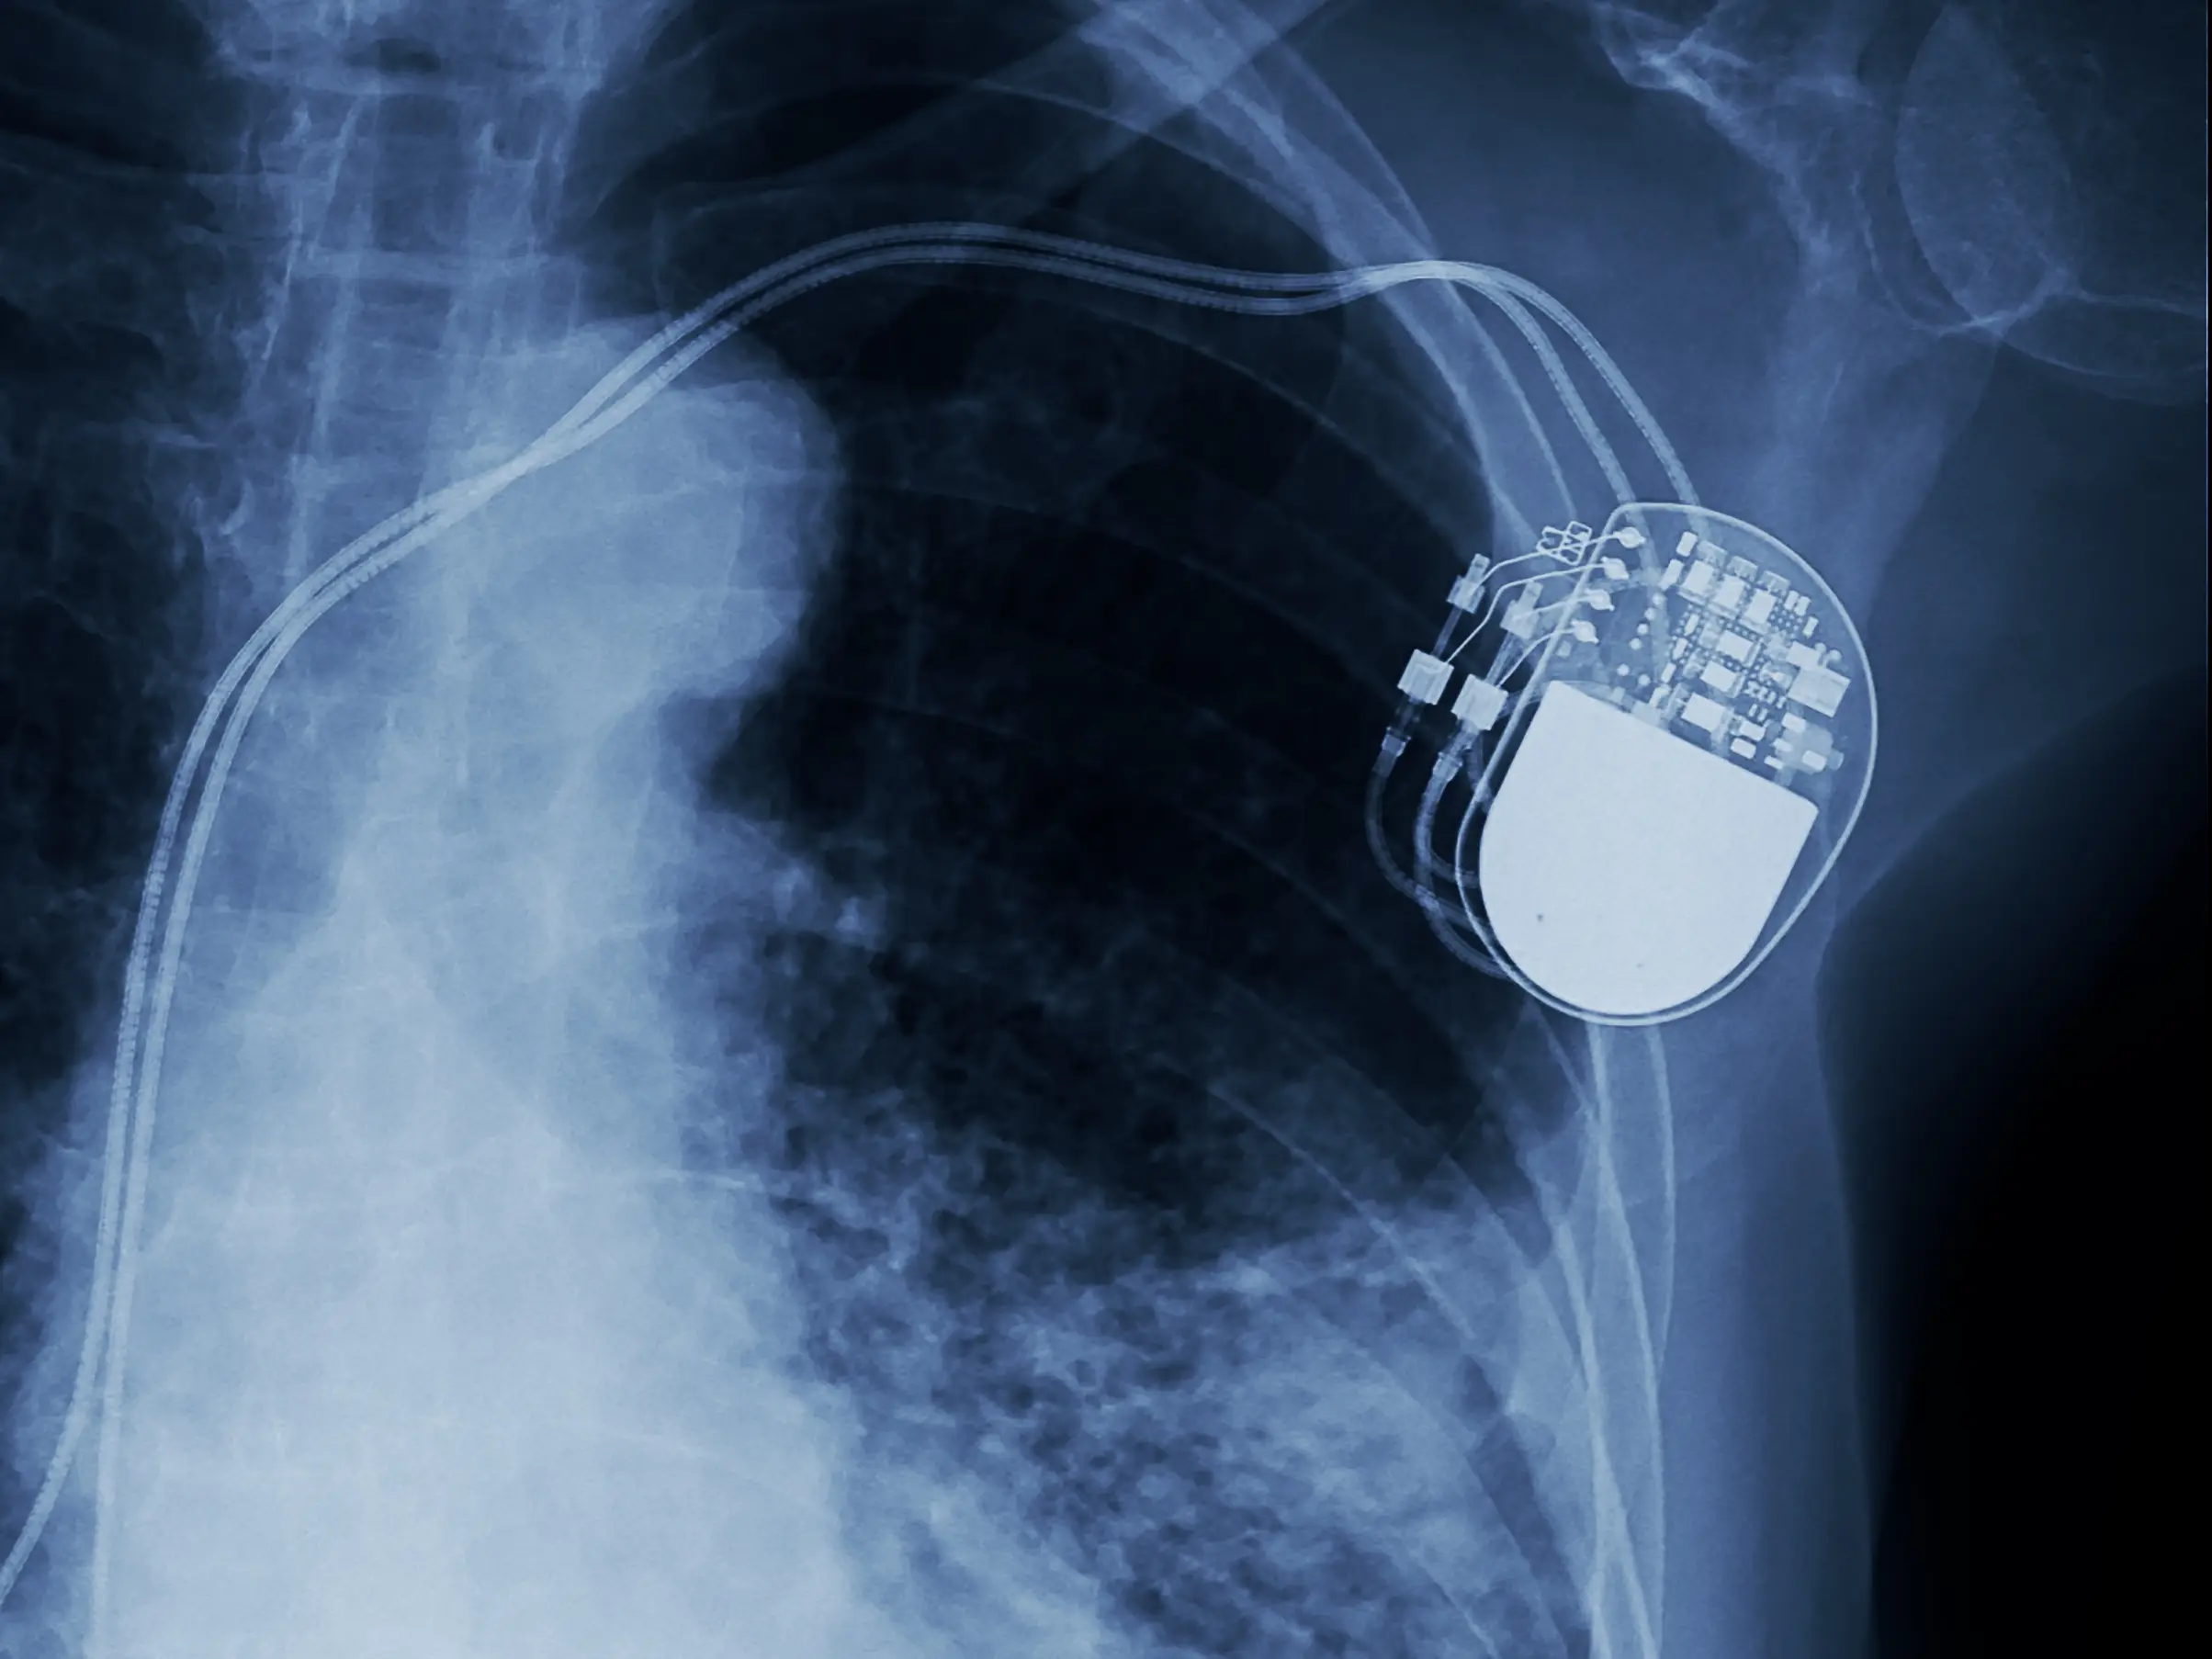 Pacemaker chest Xray